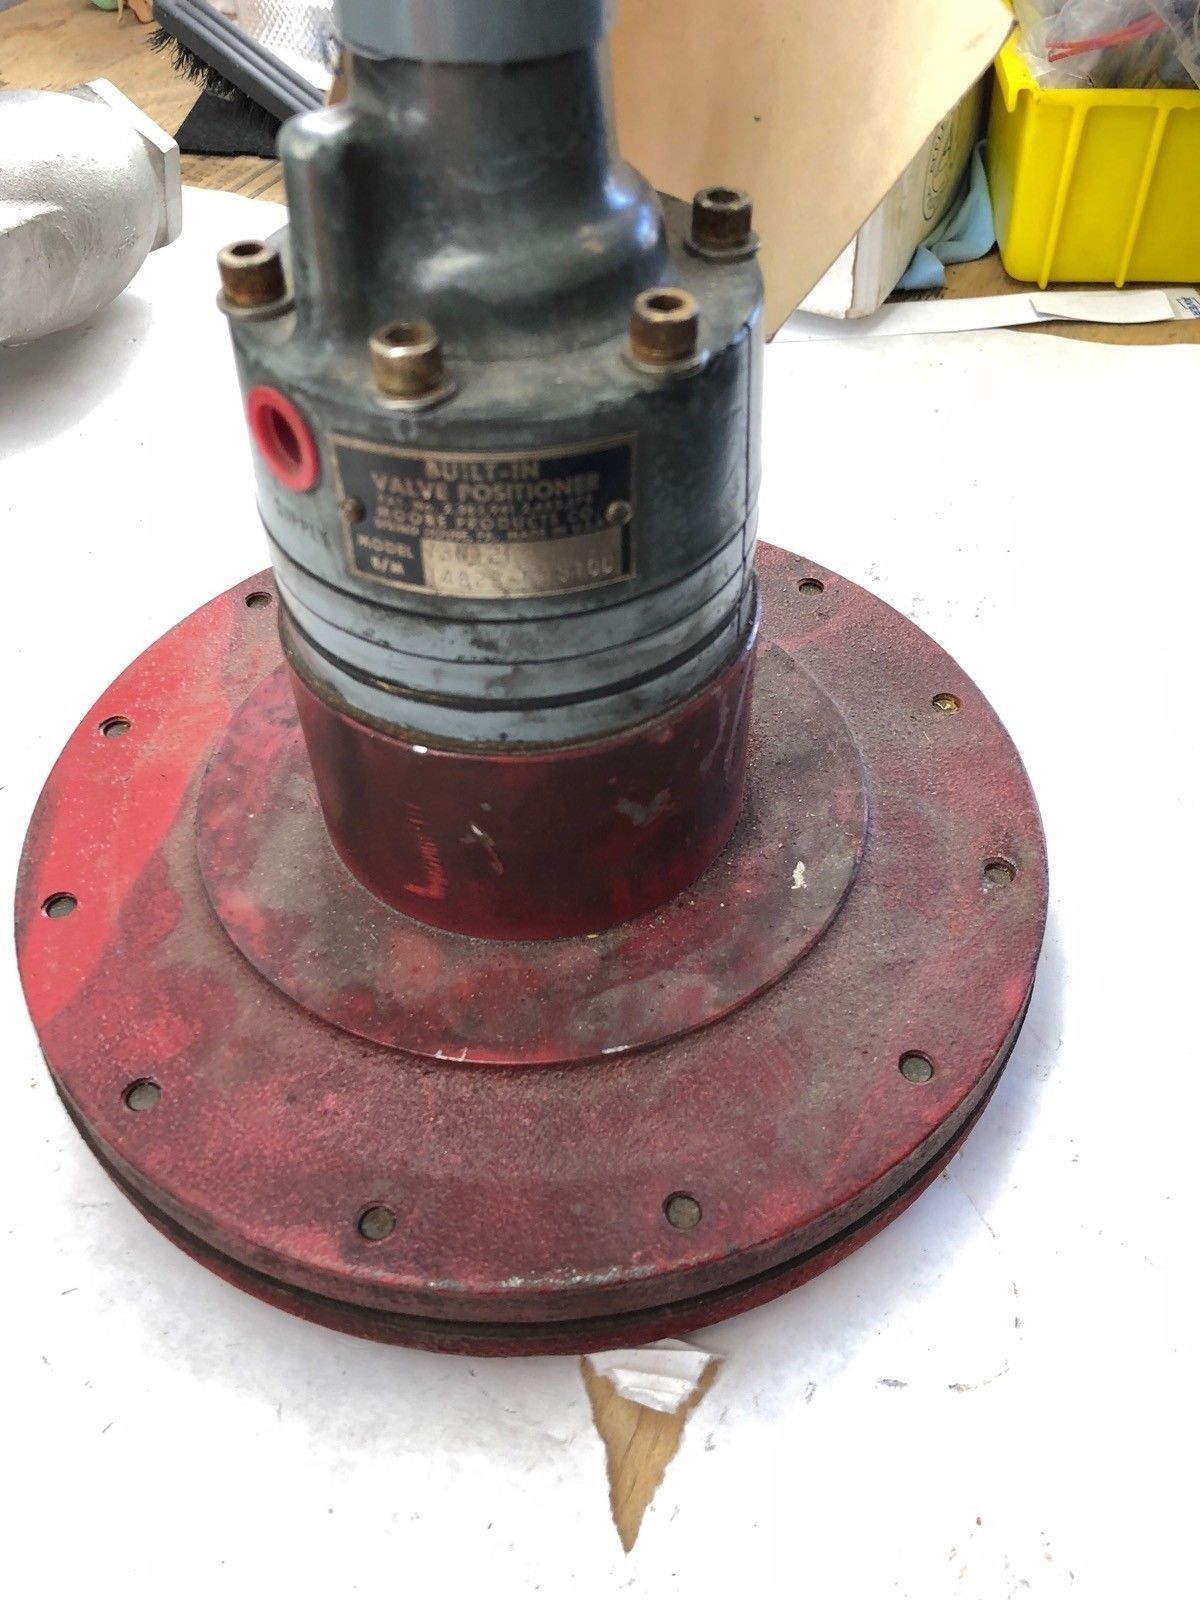 MOORE PRODUCTS 73N12F BUILT IN VALVE POSITIONER 14823-F1S1CD, FAST SHIP! 1